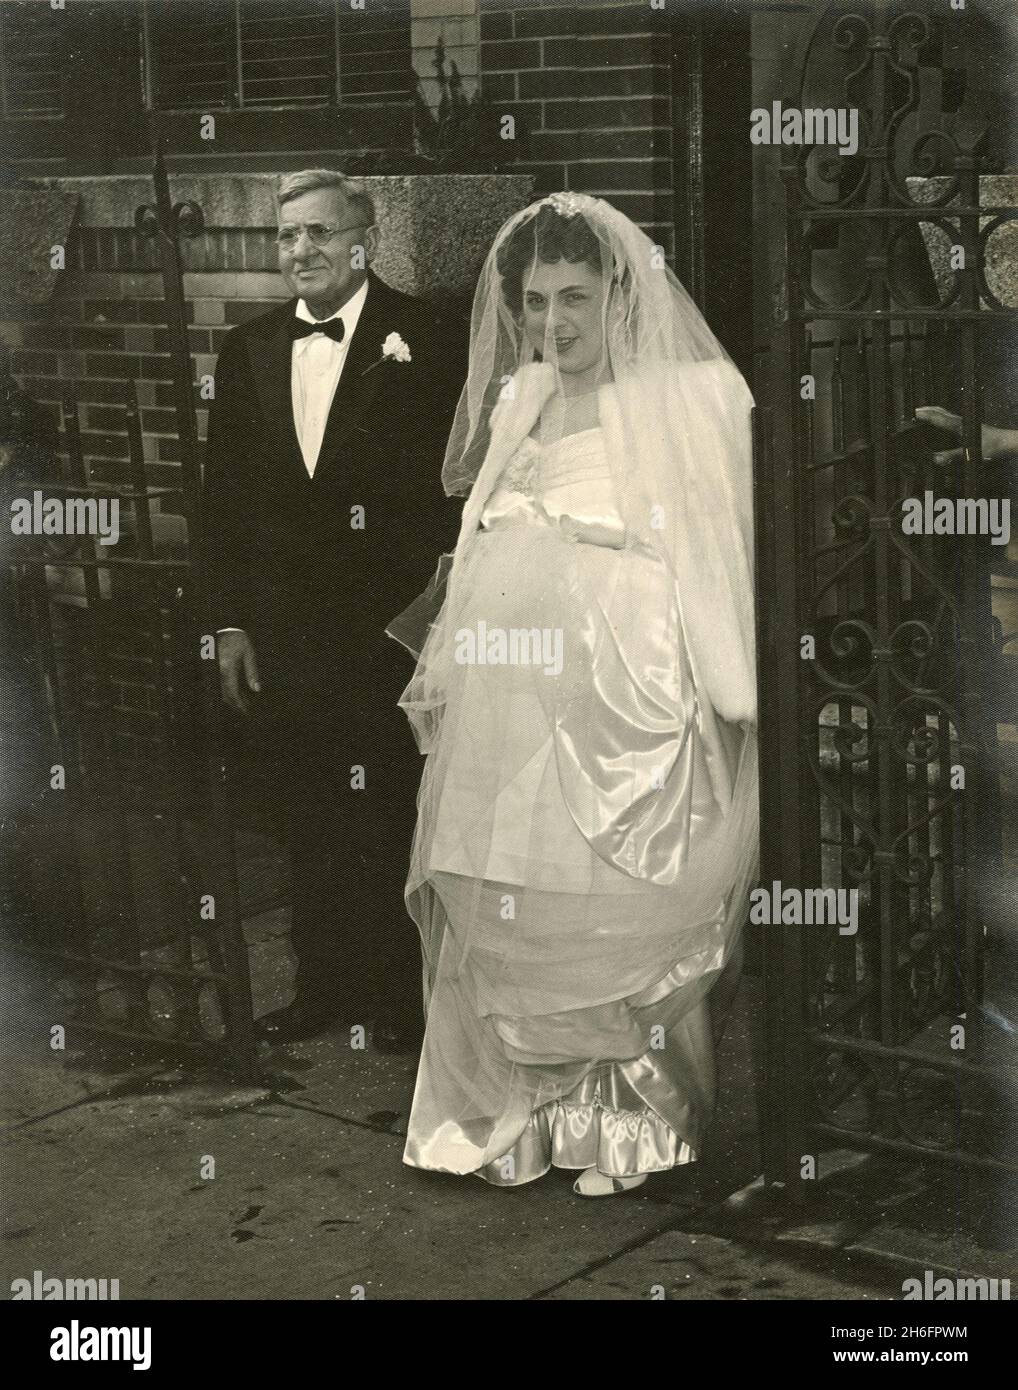 Photos of an Italian-American wedding from the 1940s: The bride comes out with her father Stock Photo